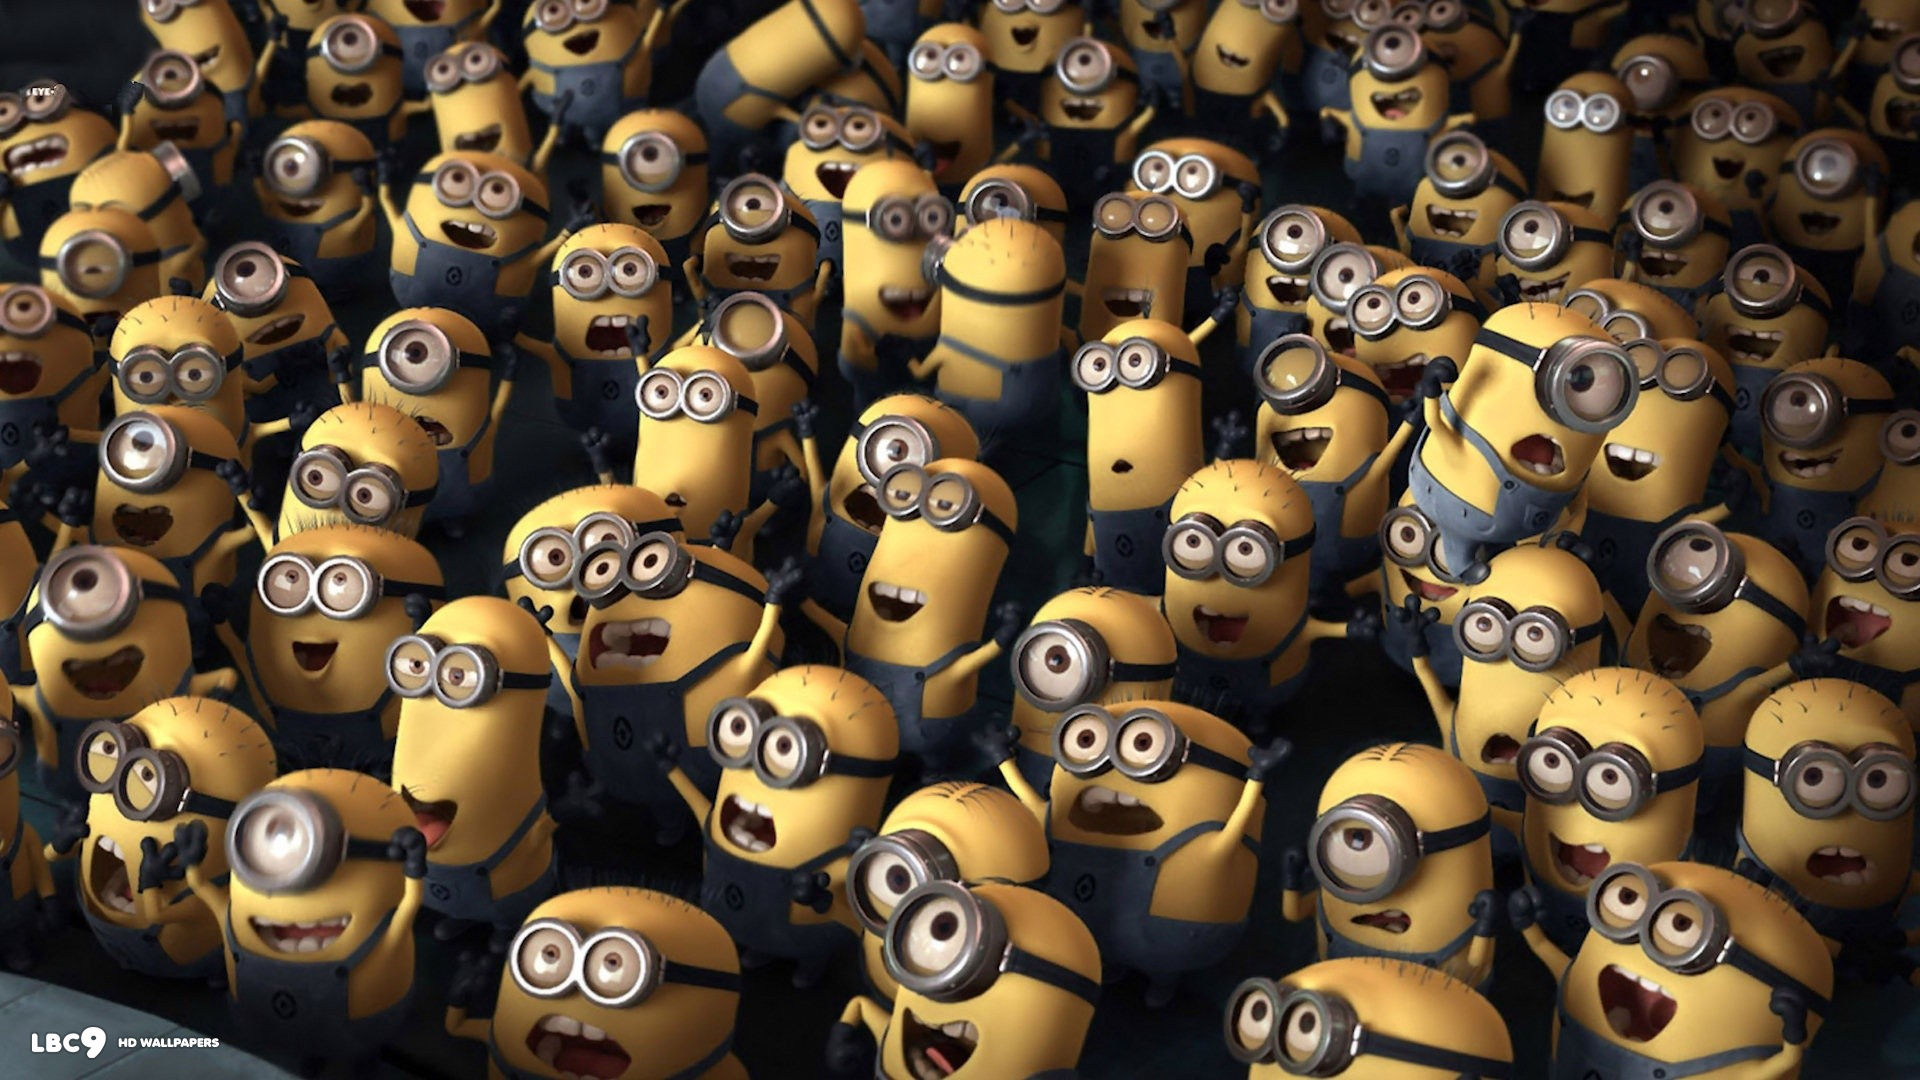 despicable me 2 wallpaper 5/6 | animated movies hd backgrounds